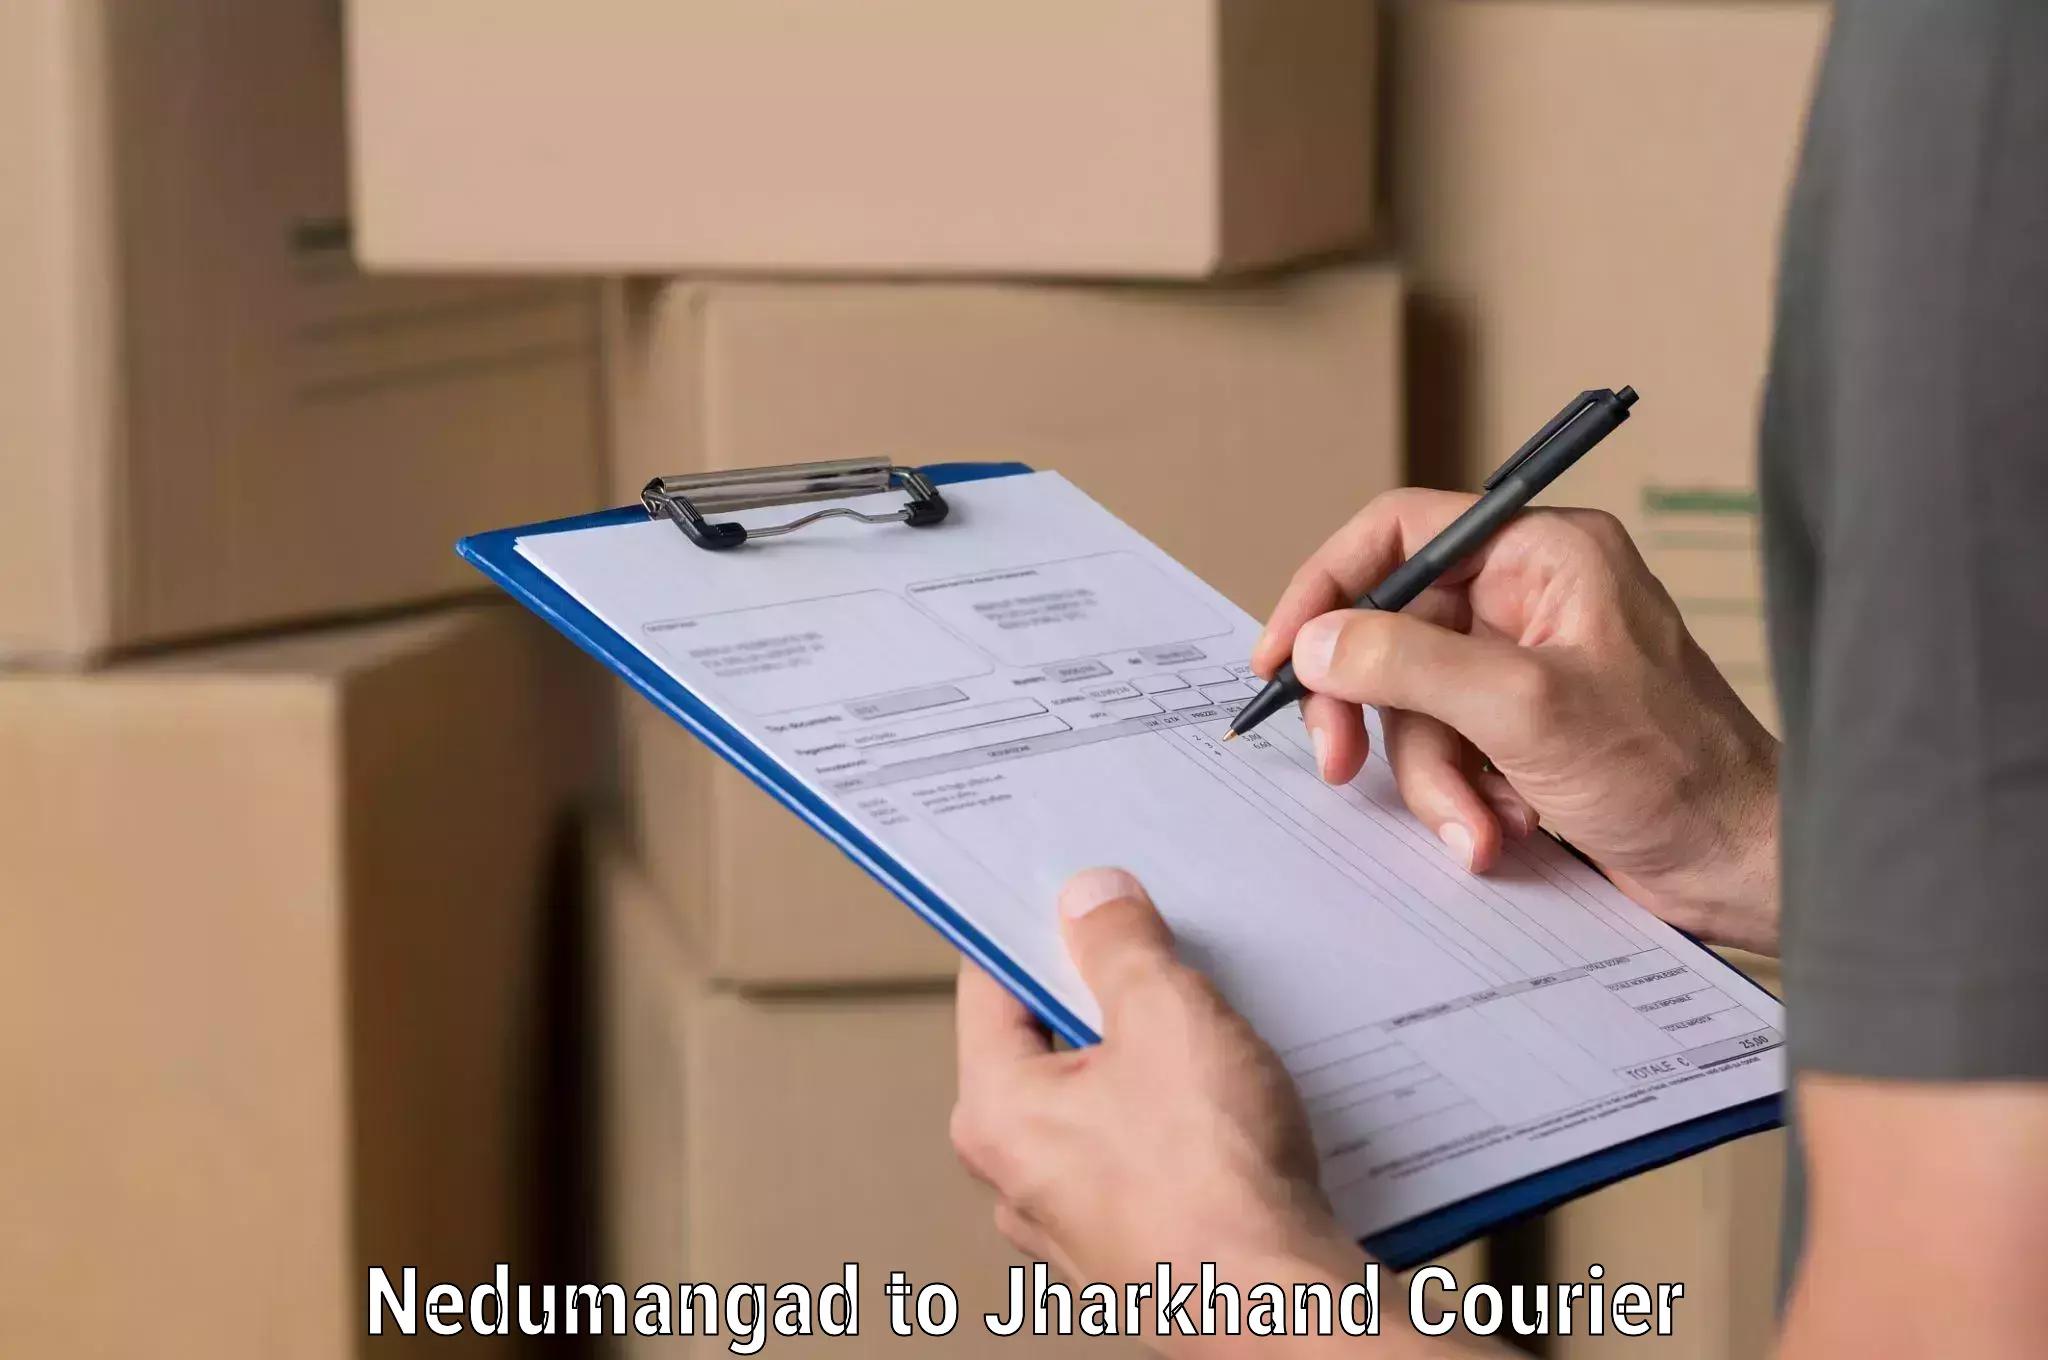 Doorstep delivery service Nedumangad to Jharkhand